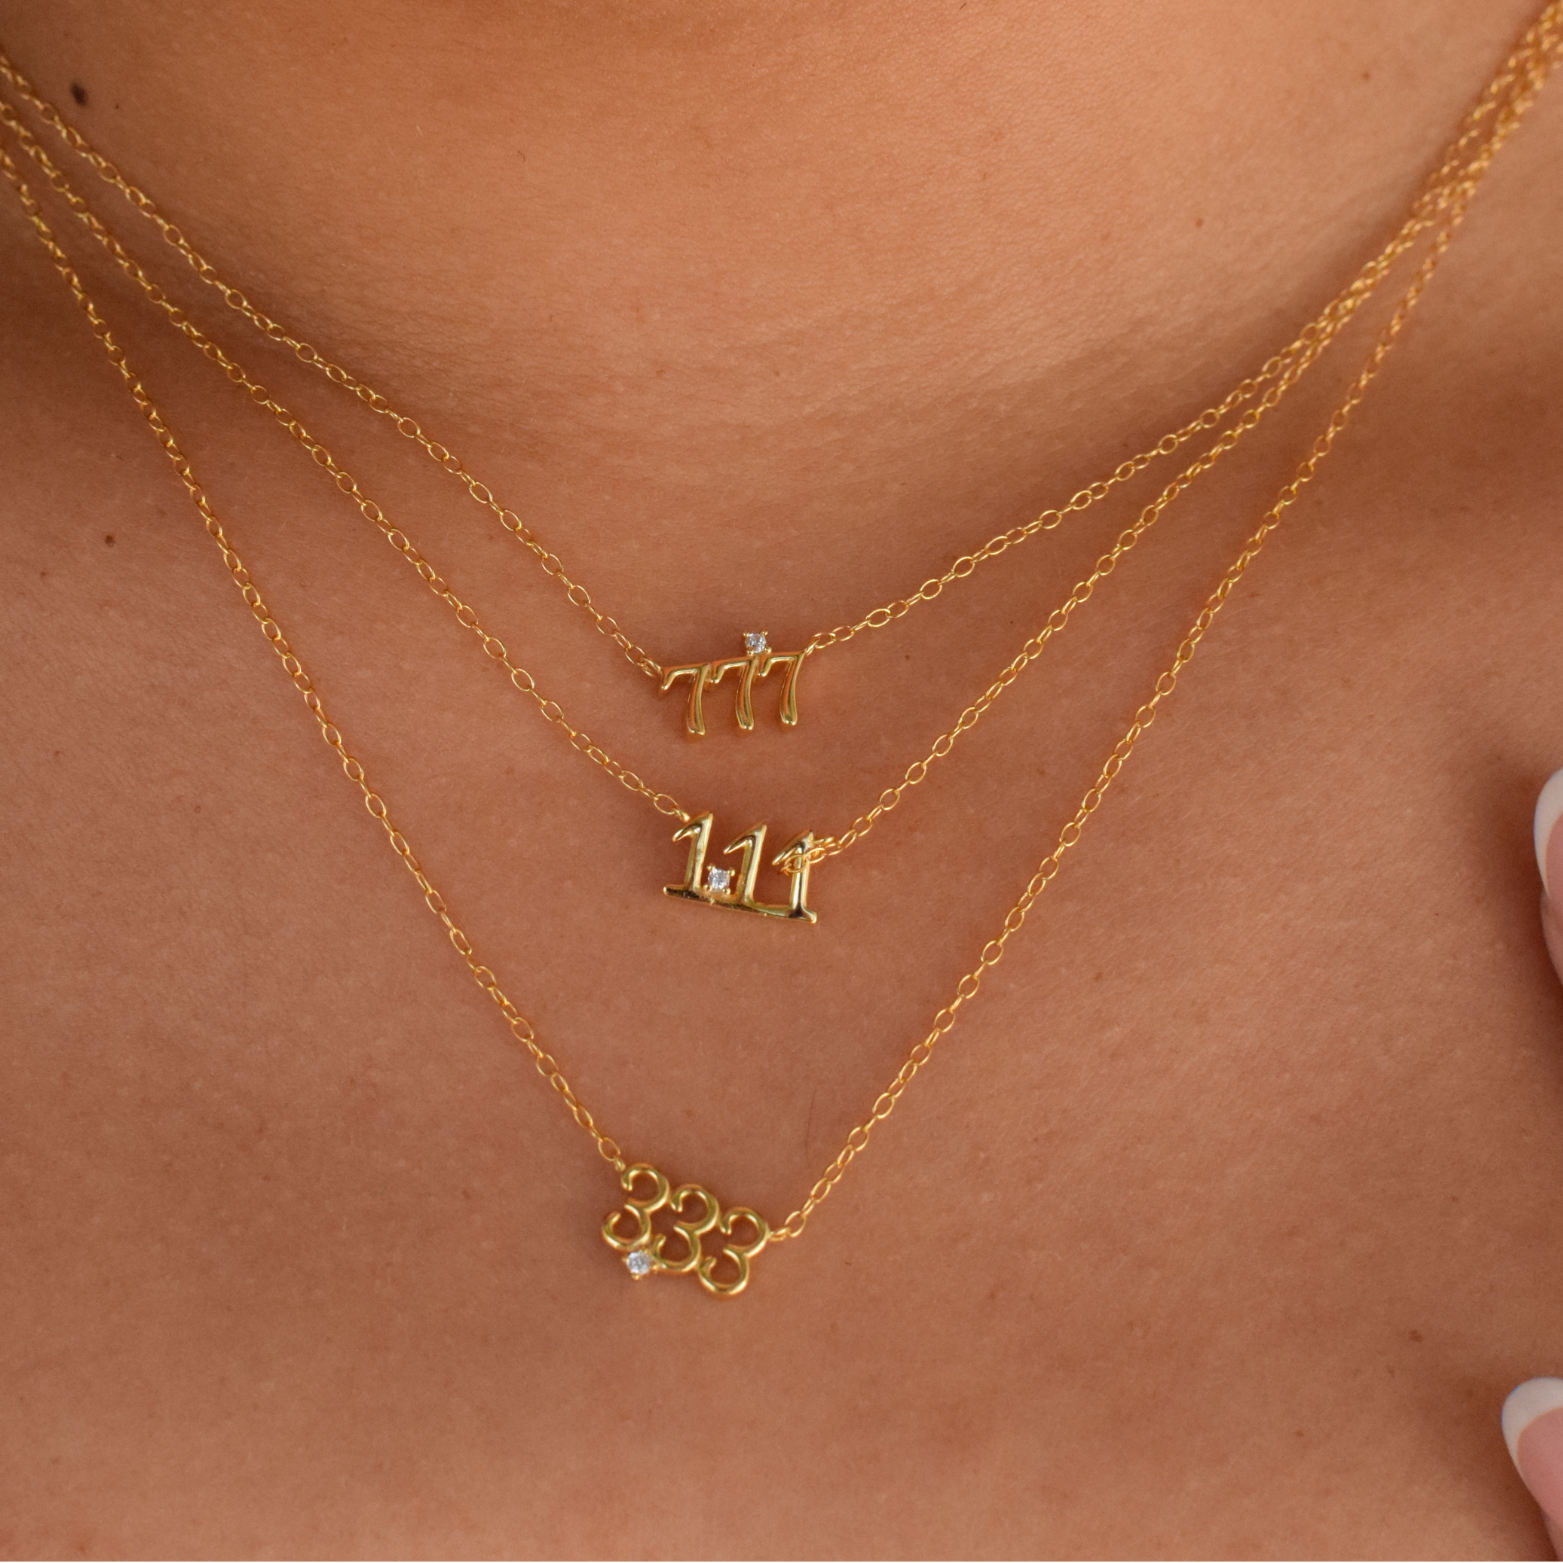 Close-up of the 333 Angel Number Necklace in 14K gold plating